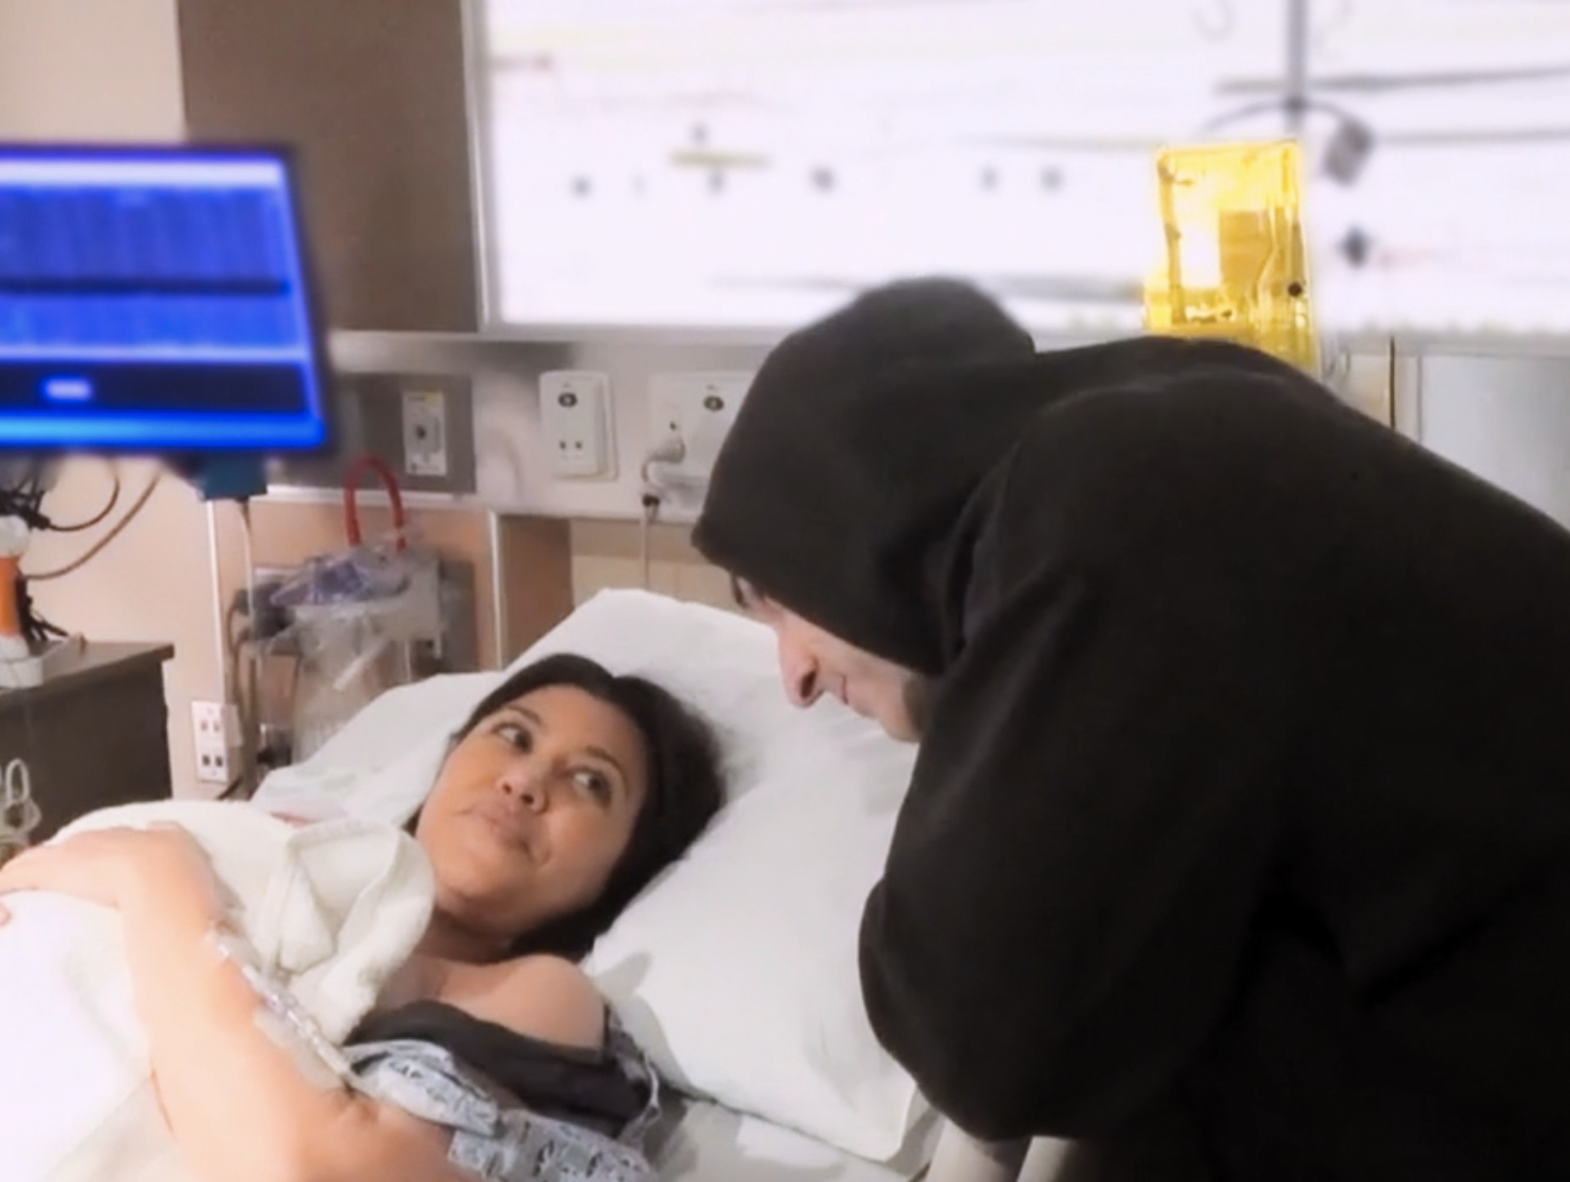 Kourtney Kardashian lies in a hospital bed holding a baby as Travis Barker, wearing a hooded sweater, leans close to her